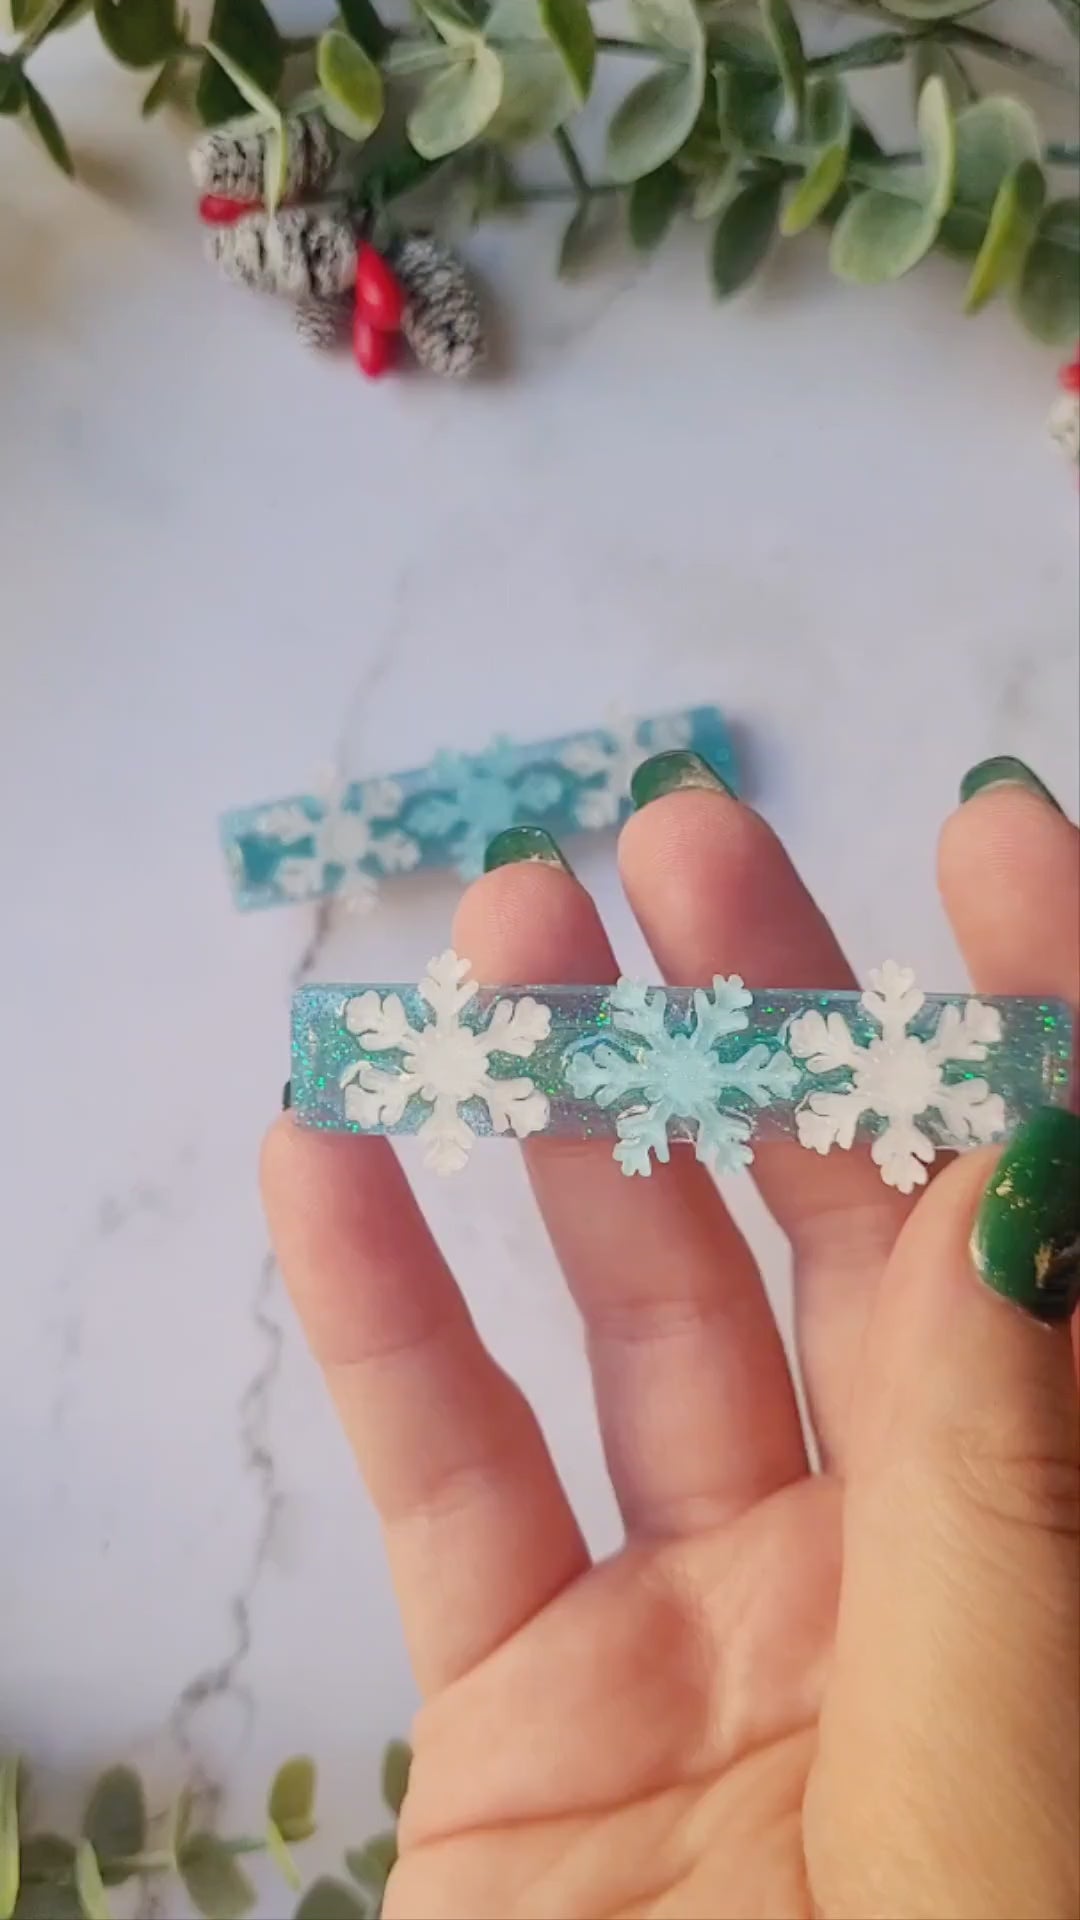 video close up of blue glitter hair clip with white and light blue snowflakes on a marble background with foliage.